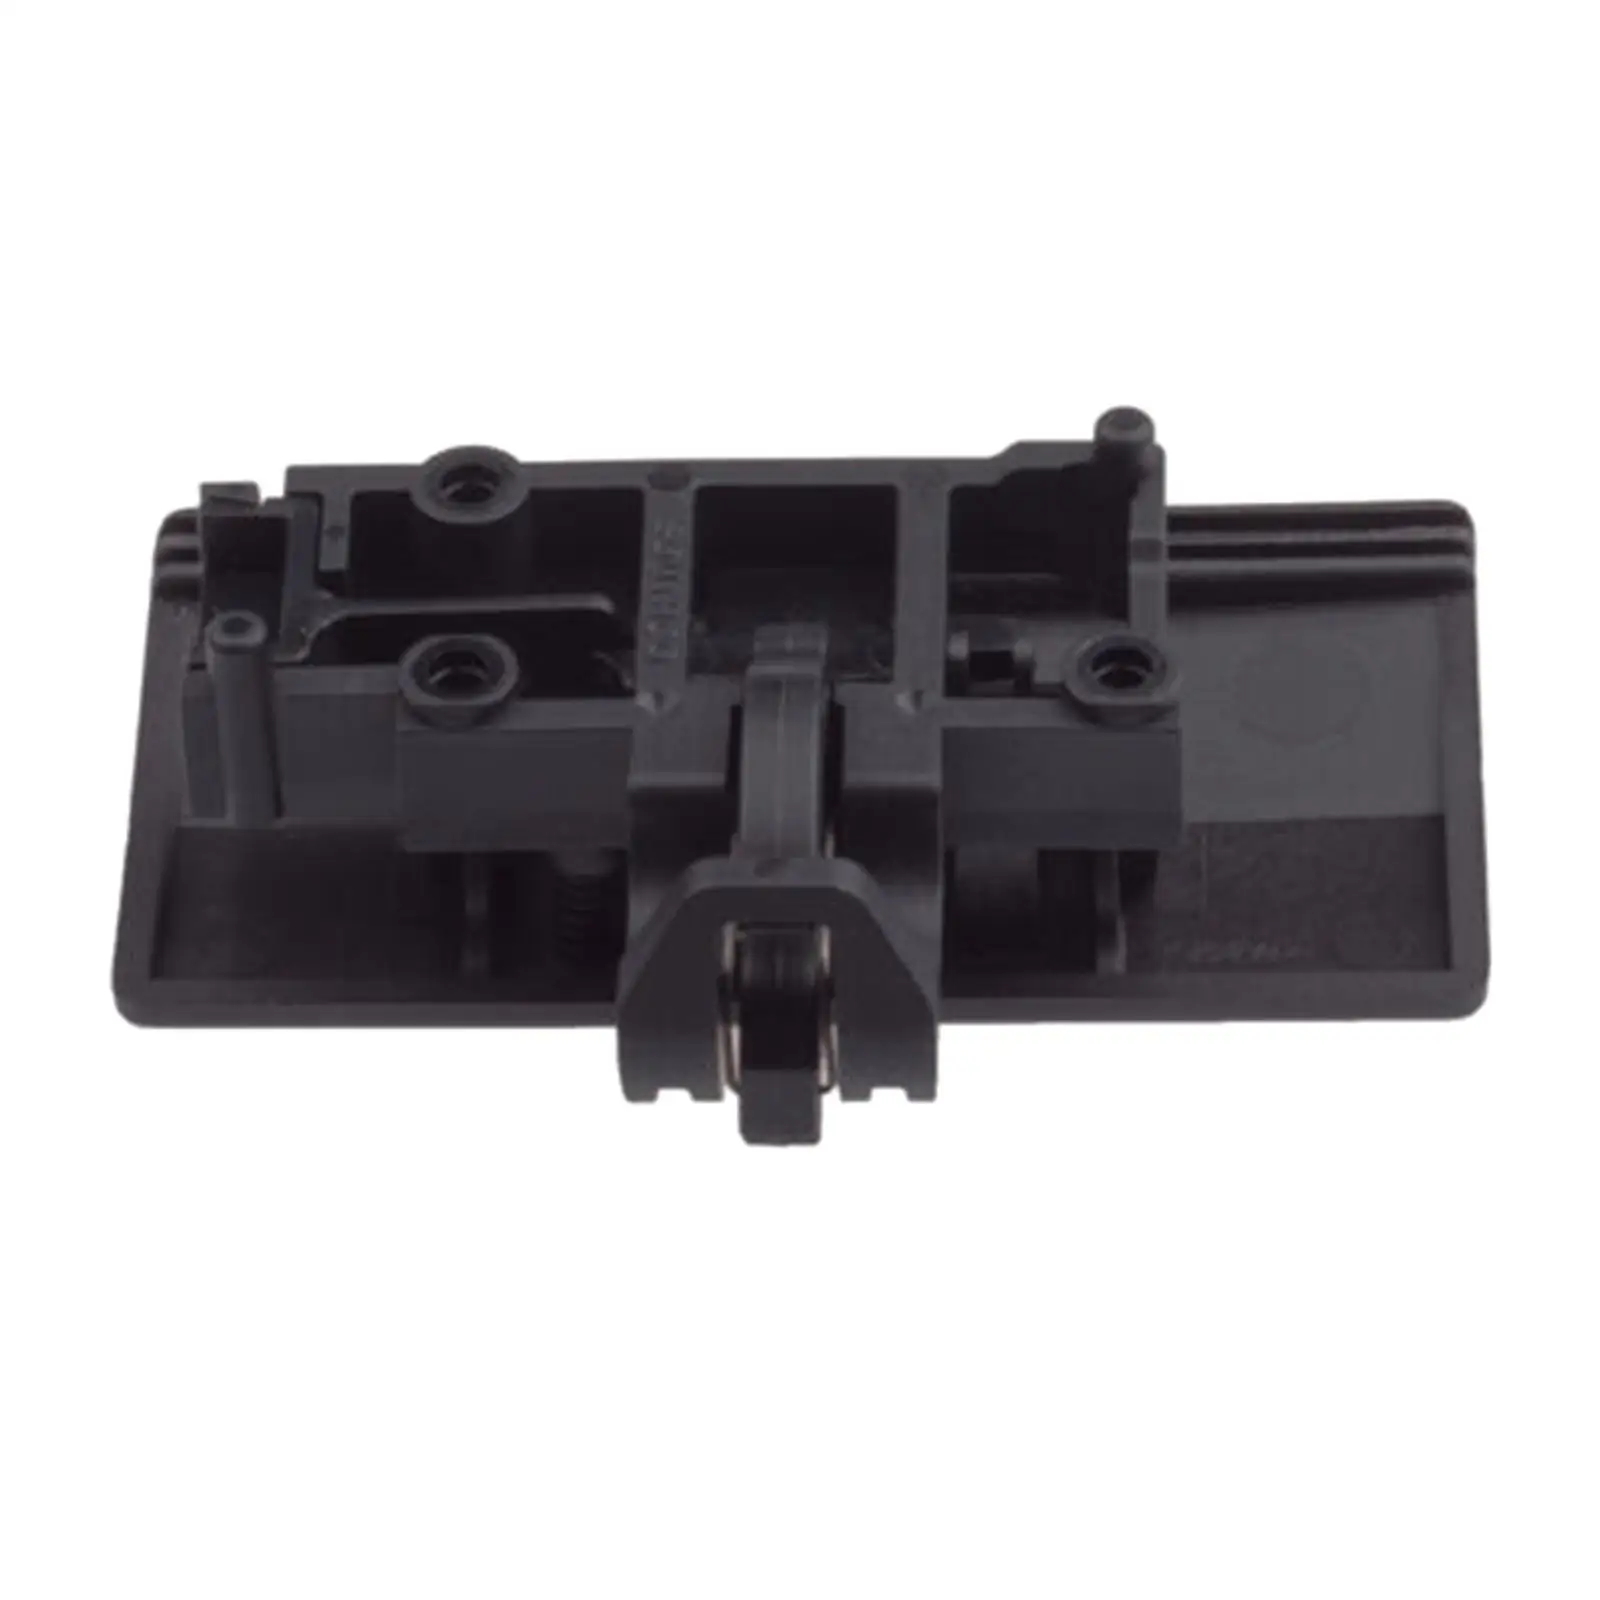 Glove Box Door Latch Lock Professional Replacement for BL3Z-1506072-Ae F150 F250